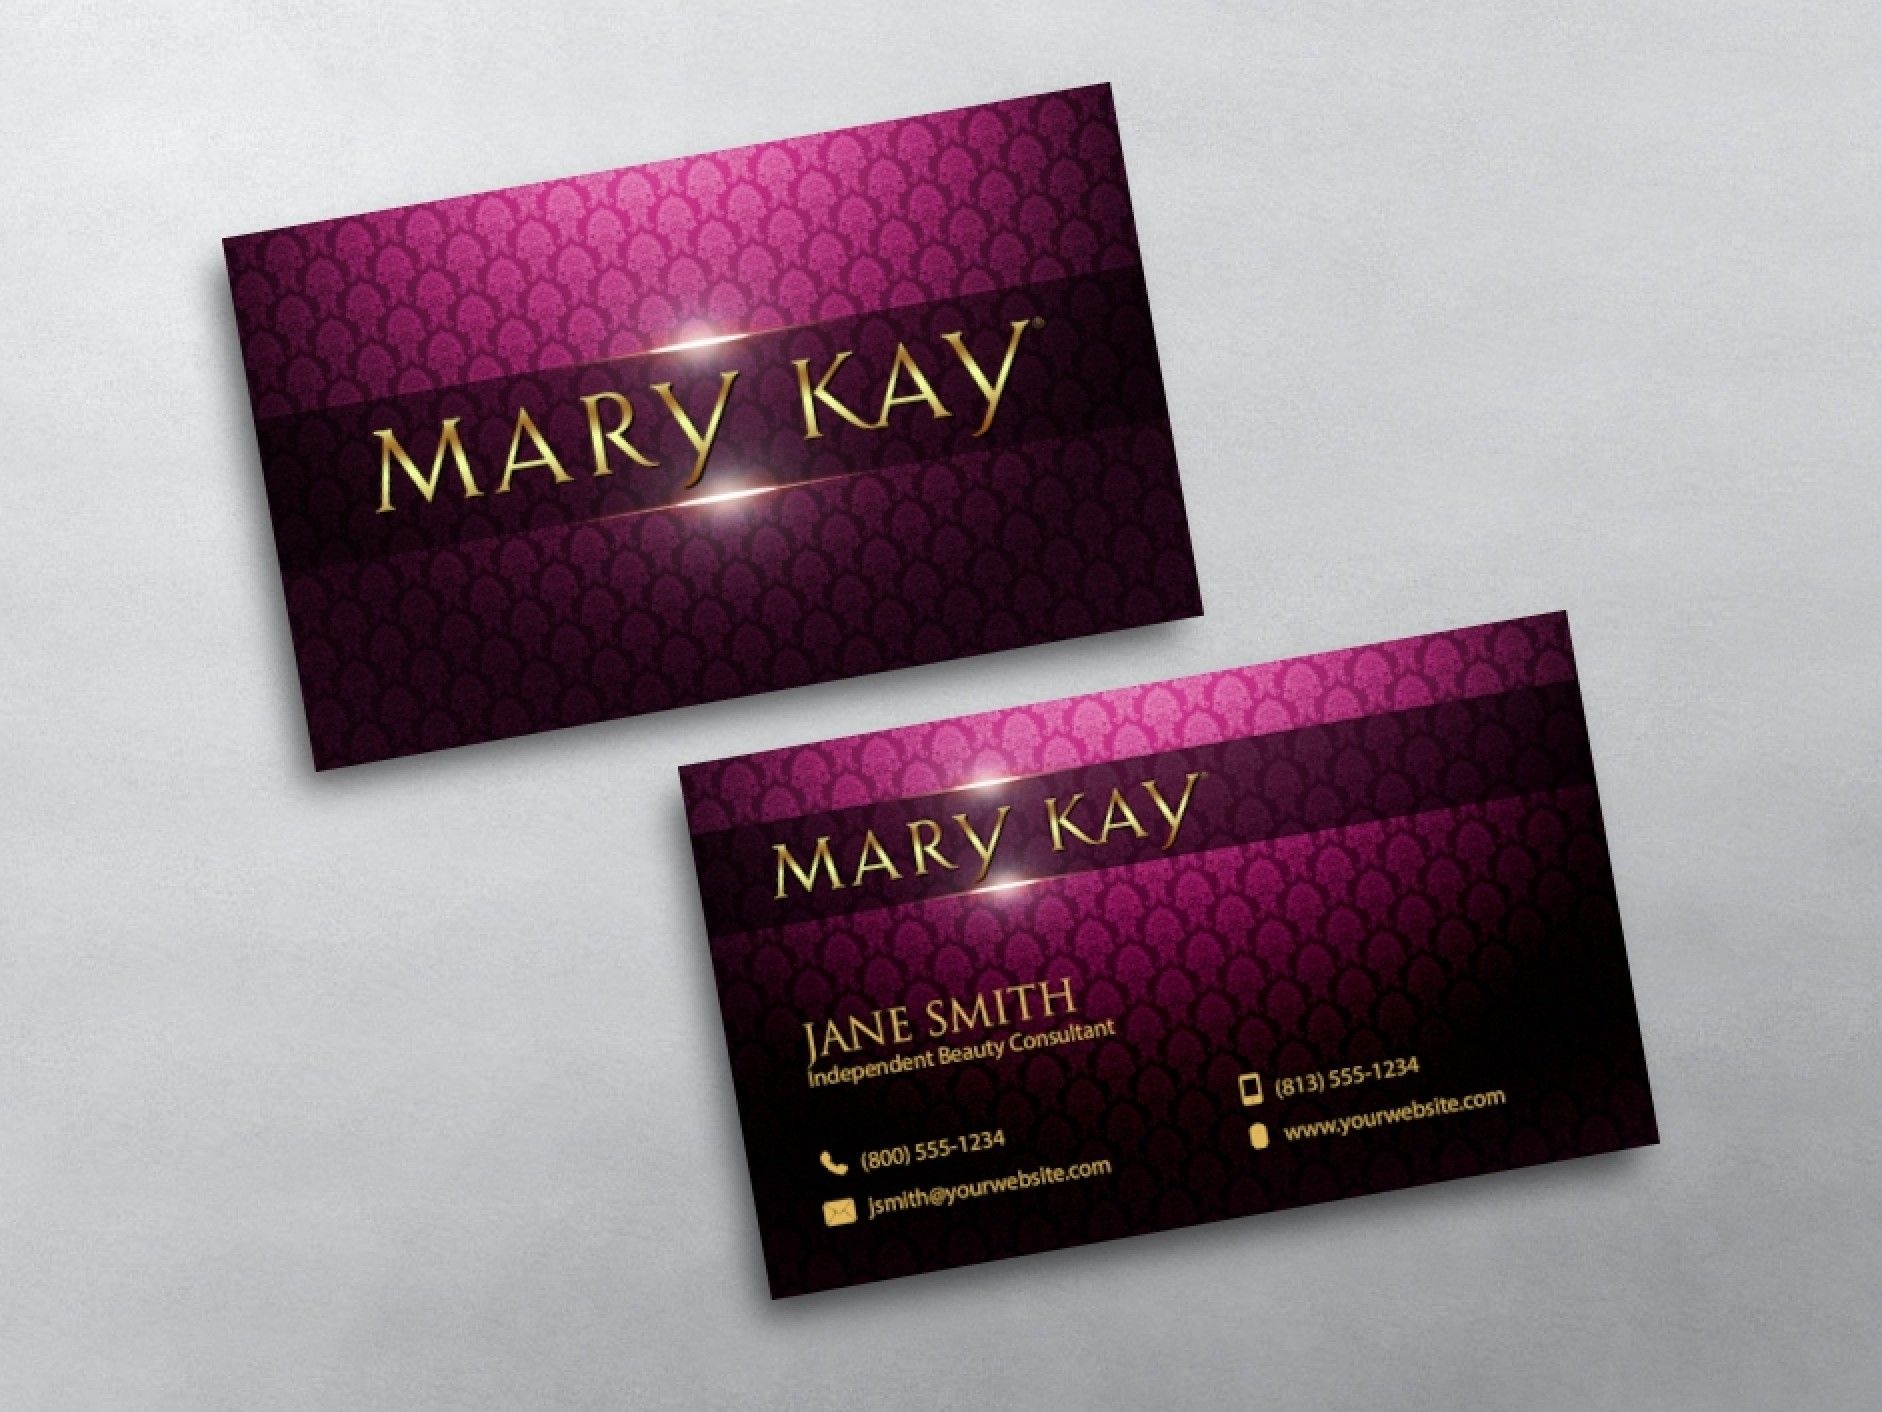 marykay business cards 2